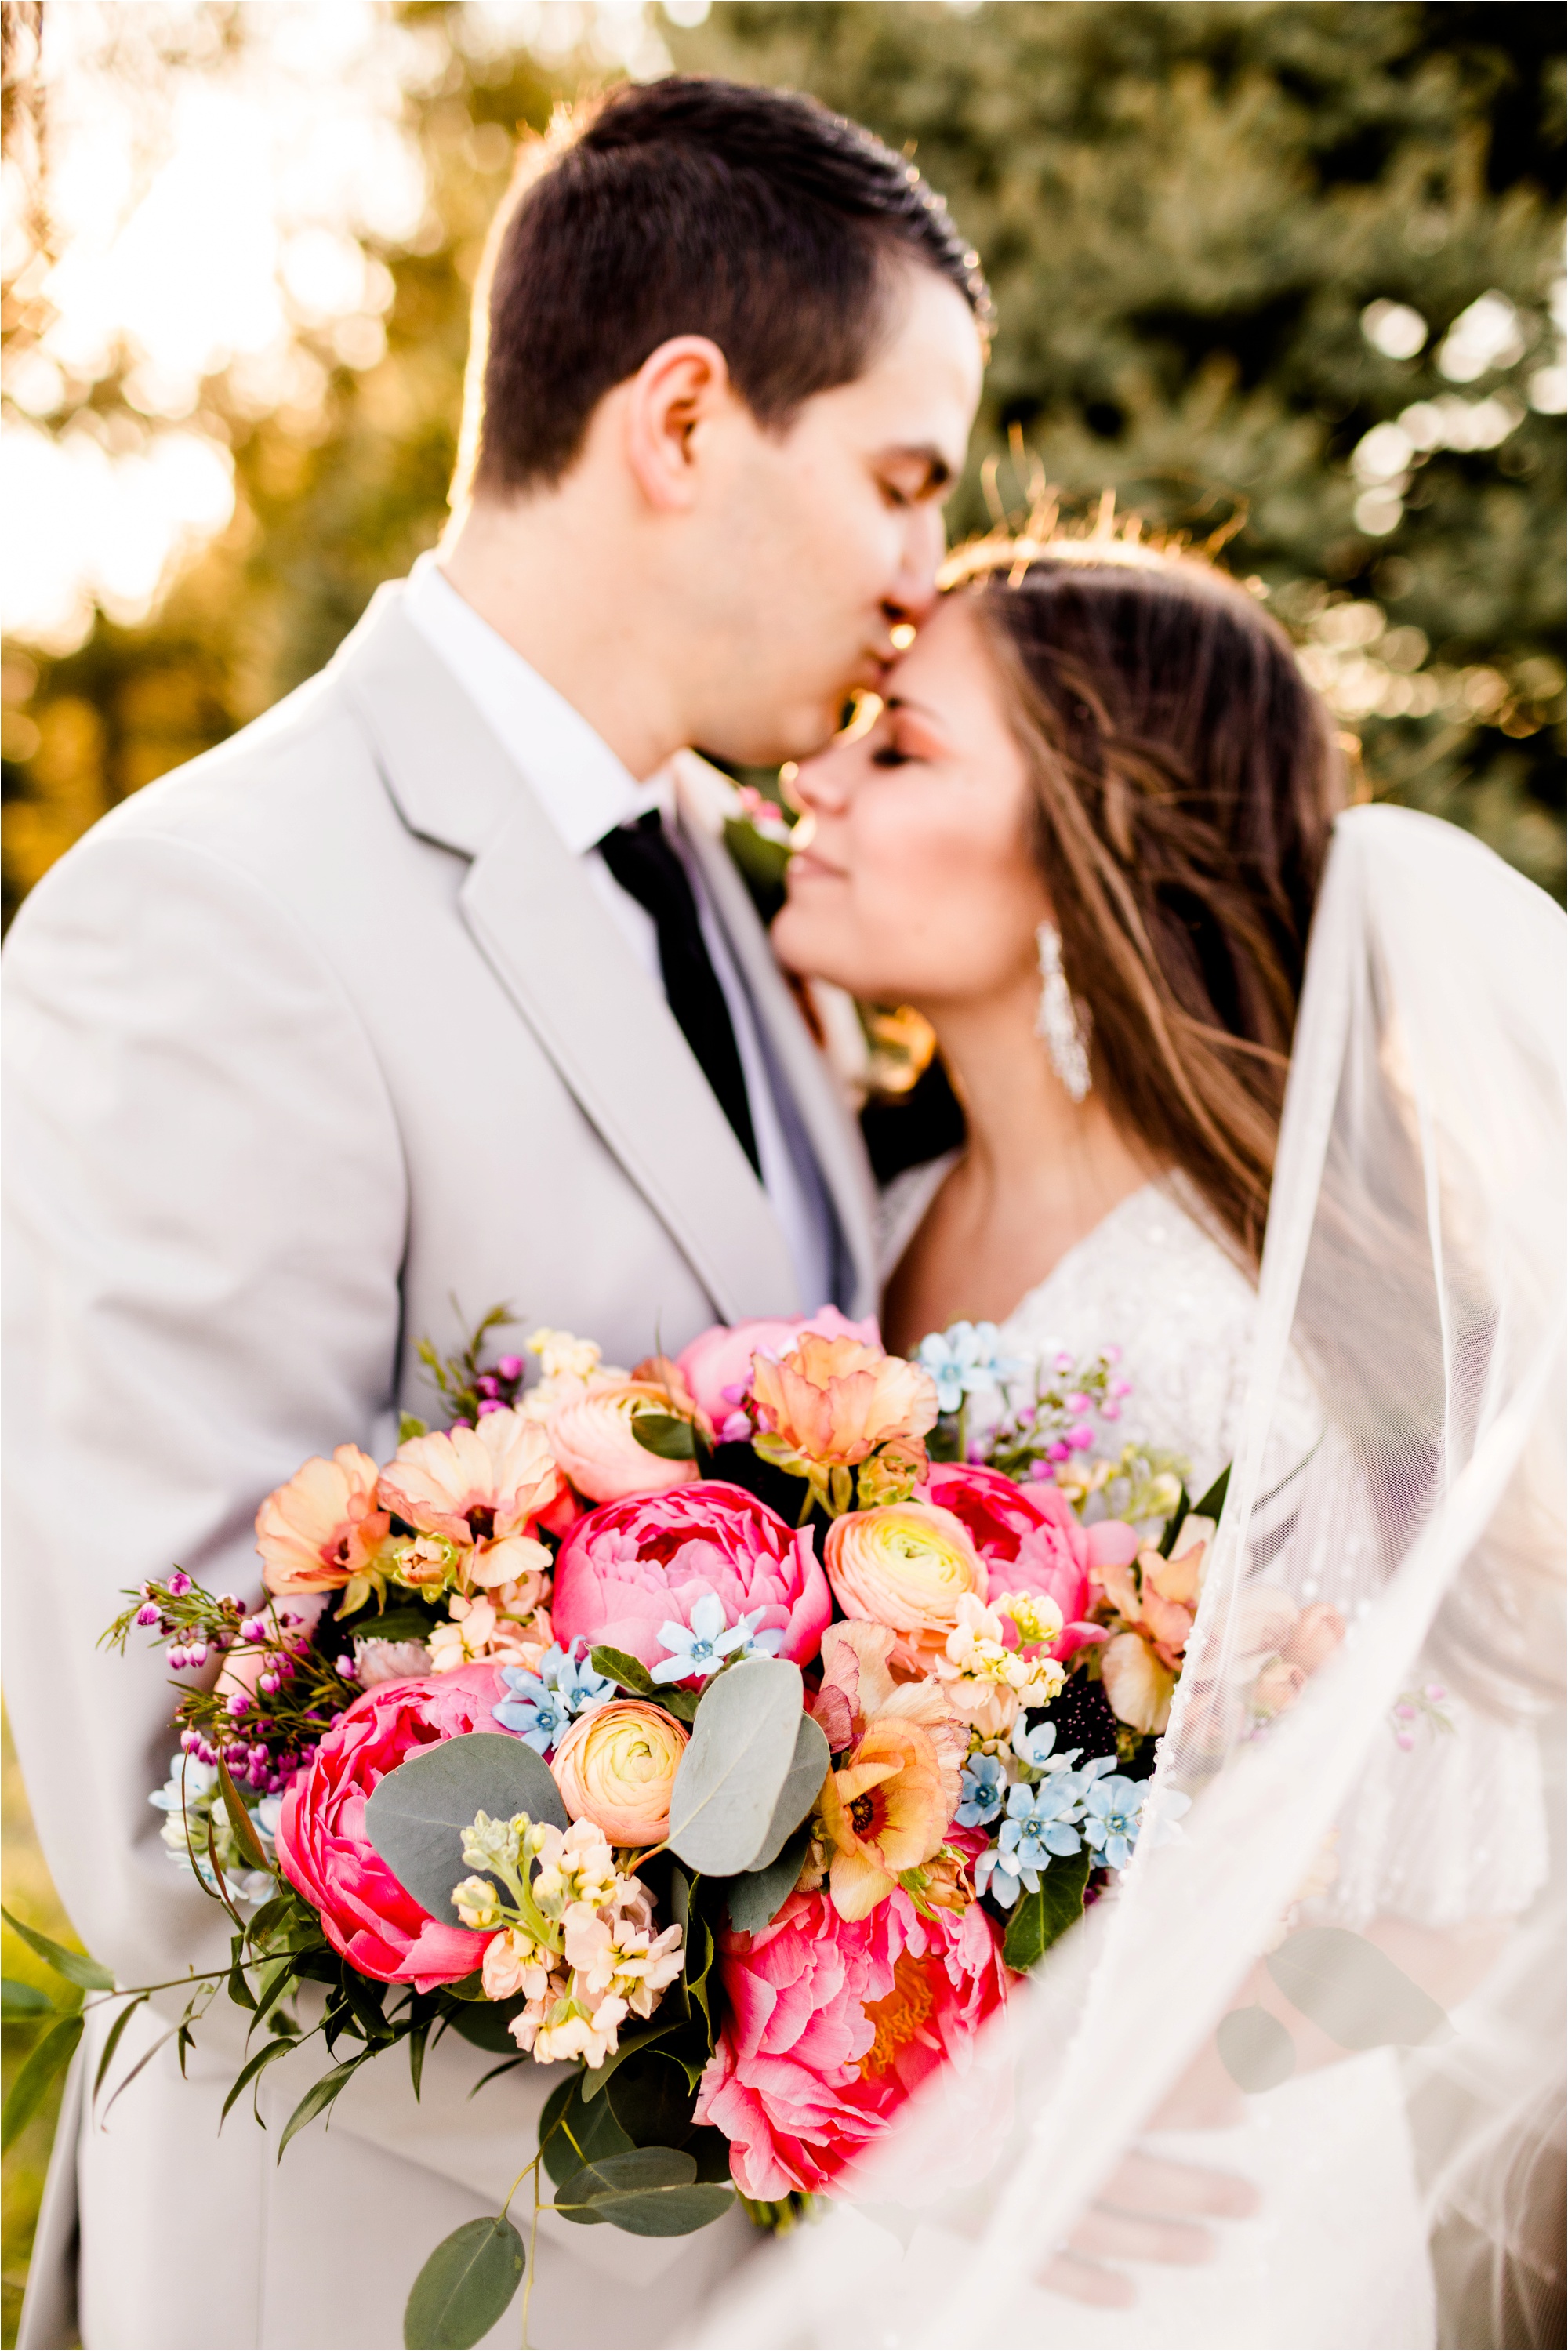 Caitlin and Luke Photography, Illinois Wedding Photographers, Champaign Wedding Photographers, Bloomington Normal Wedding Photographers, Romantic Red and Pink Sunset Styled Shoot_9549.jpg